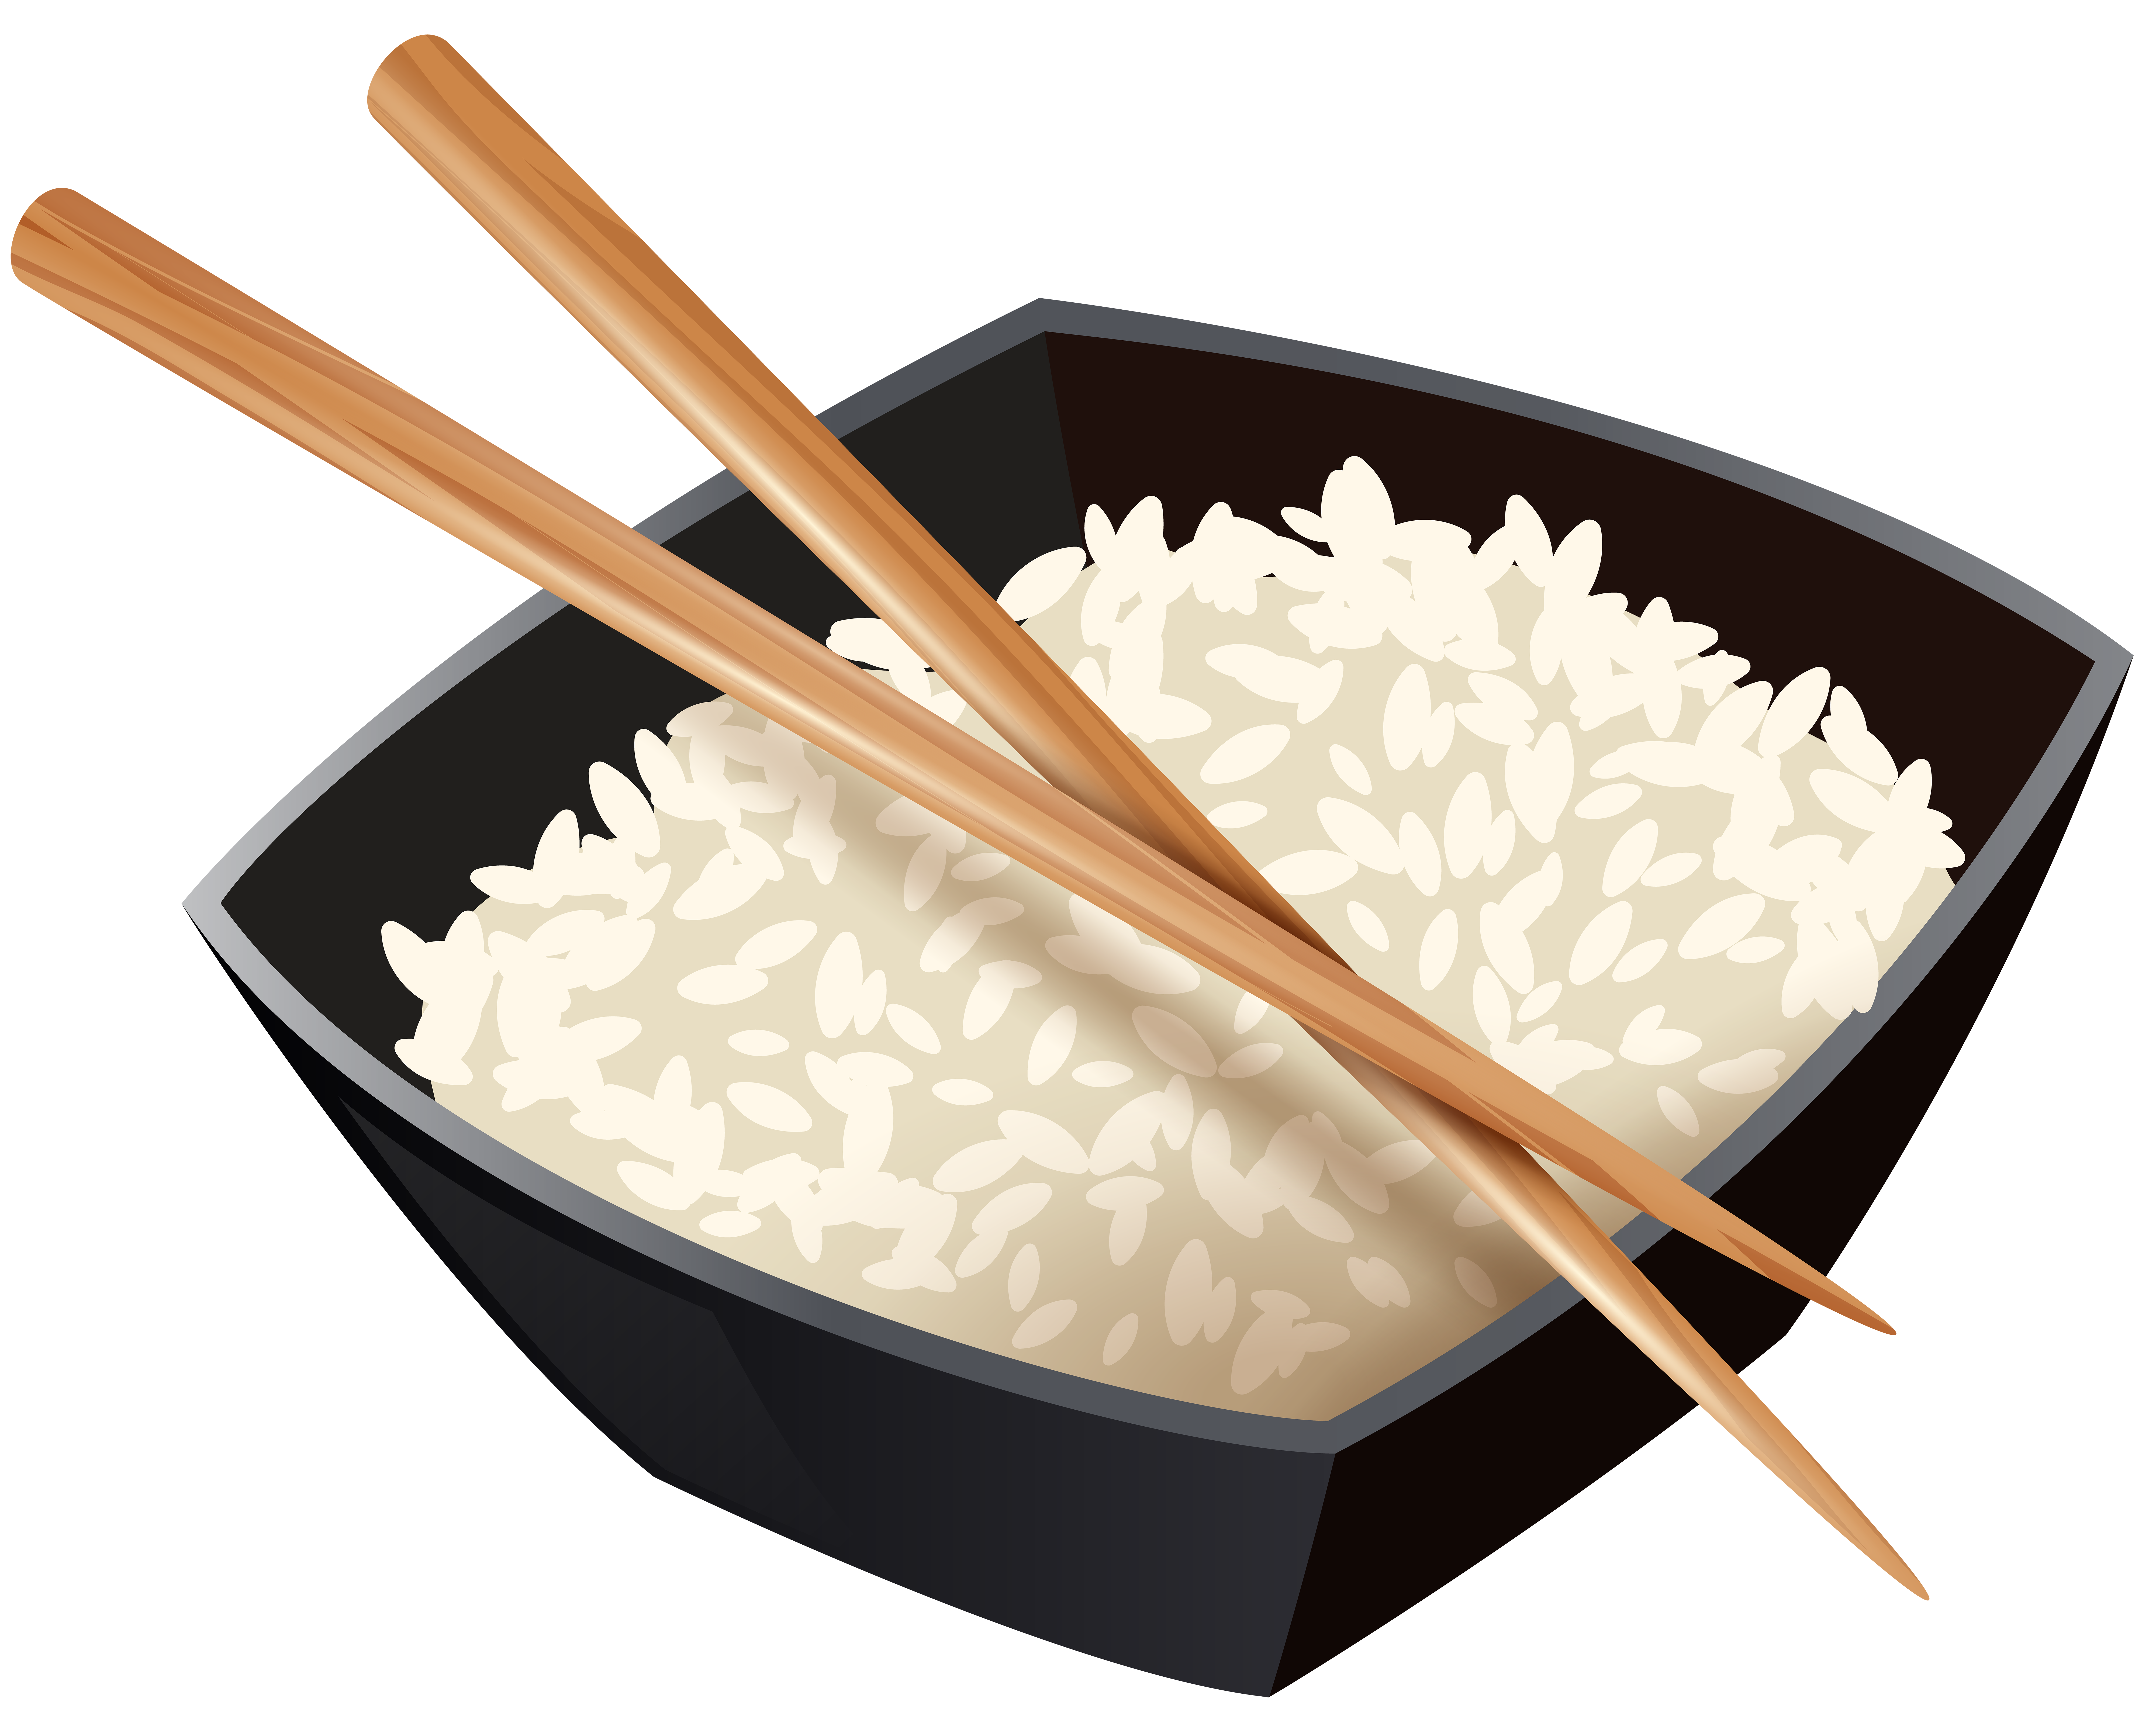 Chinese and best web. Chopsticks clipart plate rice